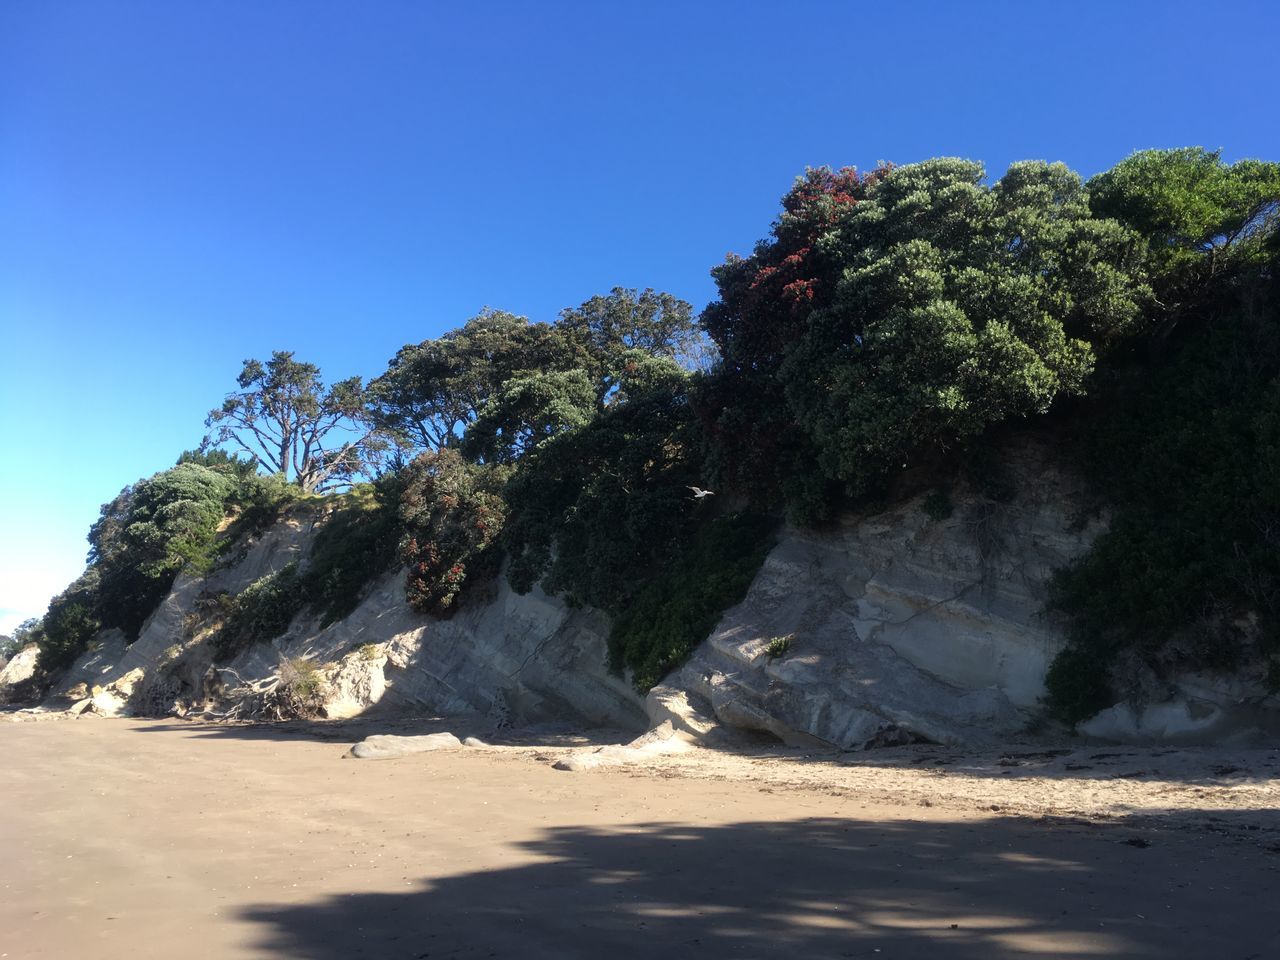 sunlight, nature, clear sky, day, tranquility, sand, beauty in nature, rock - object, no people, tree, blue, outdoors, tranquil scene, scenics, shadow, beach, sky